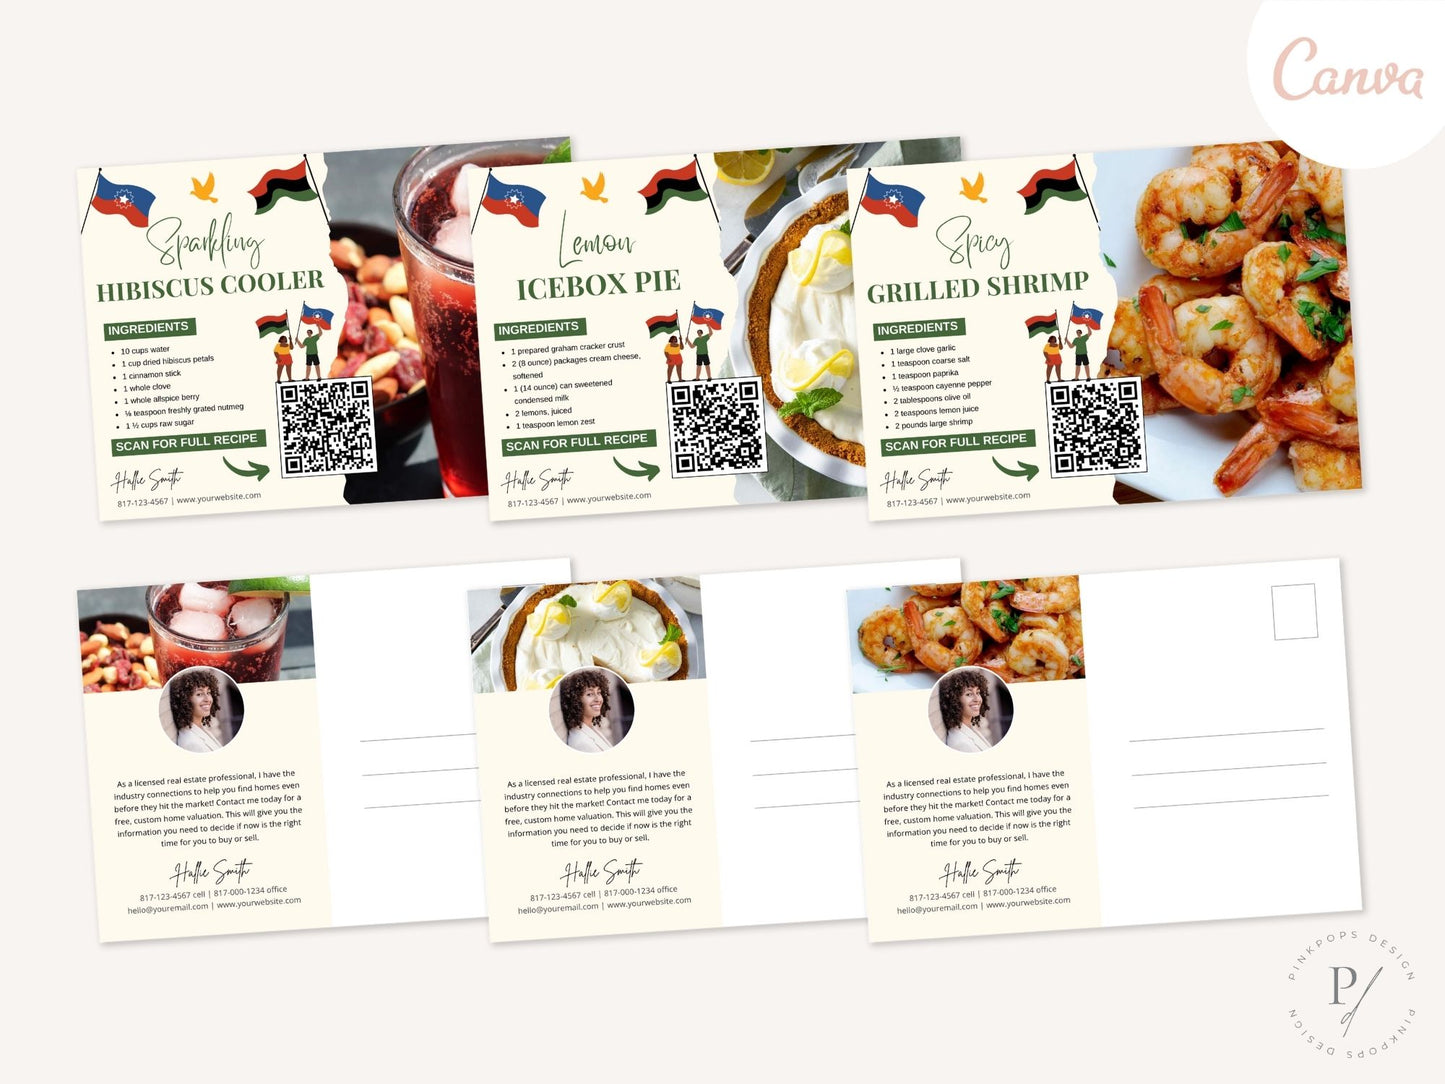 Juneteenth Real Estate Recipe Postcards - Celebrate cultural heritage with delicious recipes and community connection.